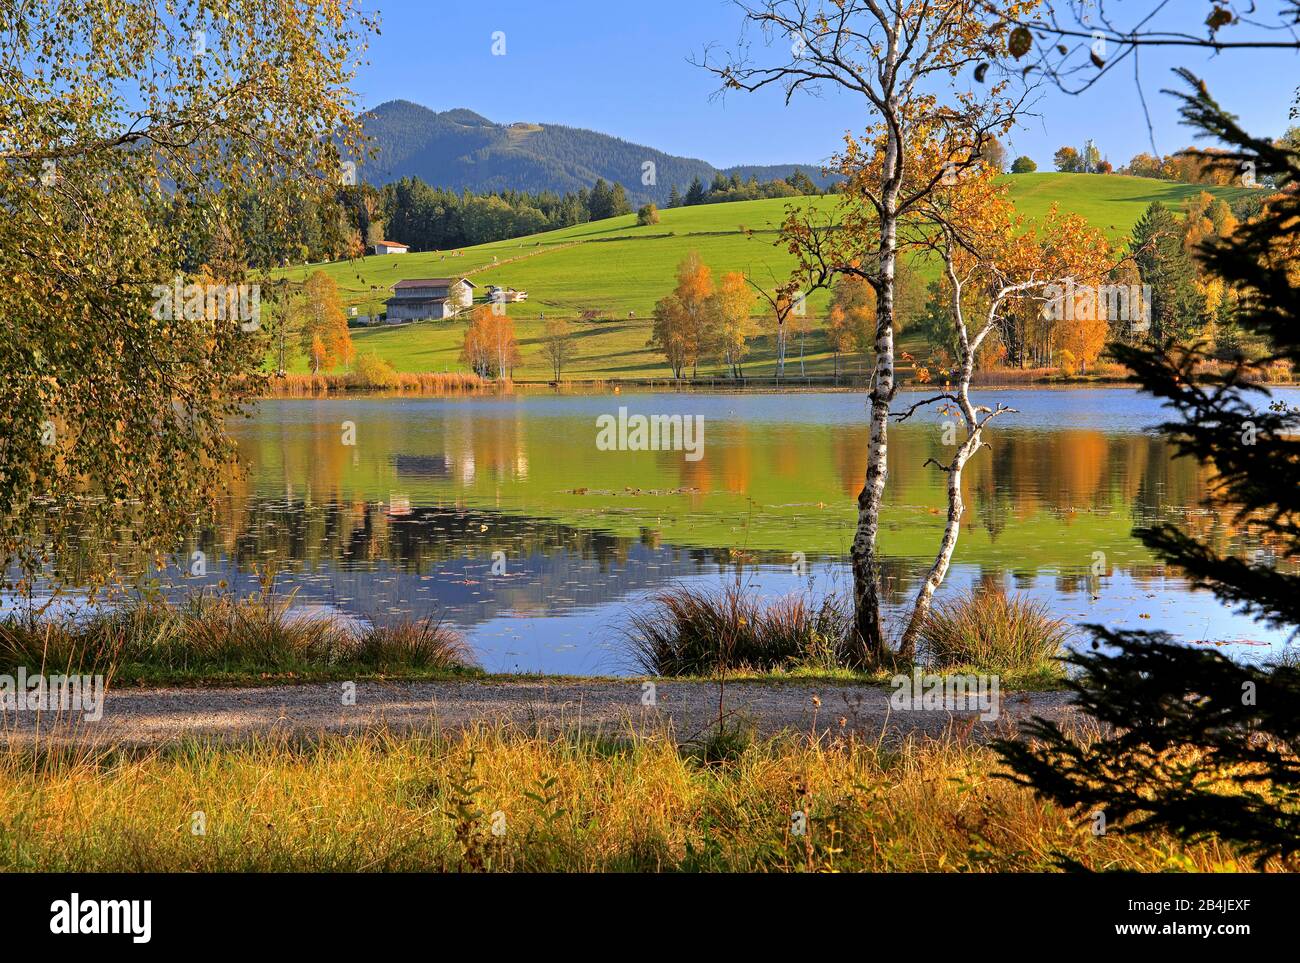 Moorland landscape at the Soiener See with Hörnle (1484m) of the Ammergau Alps, Bad Bayersoien, Alpine foothills, Upper Bavaria, Bavaria, Germany Stock Photo